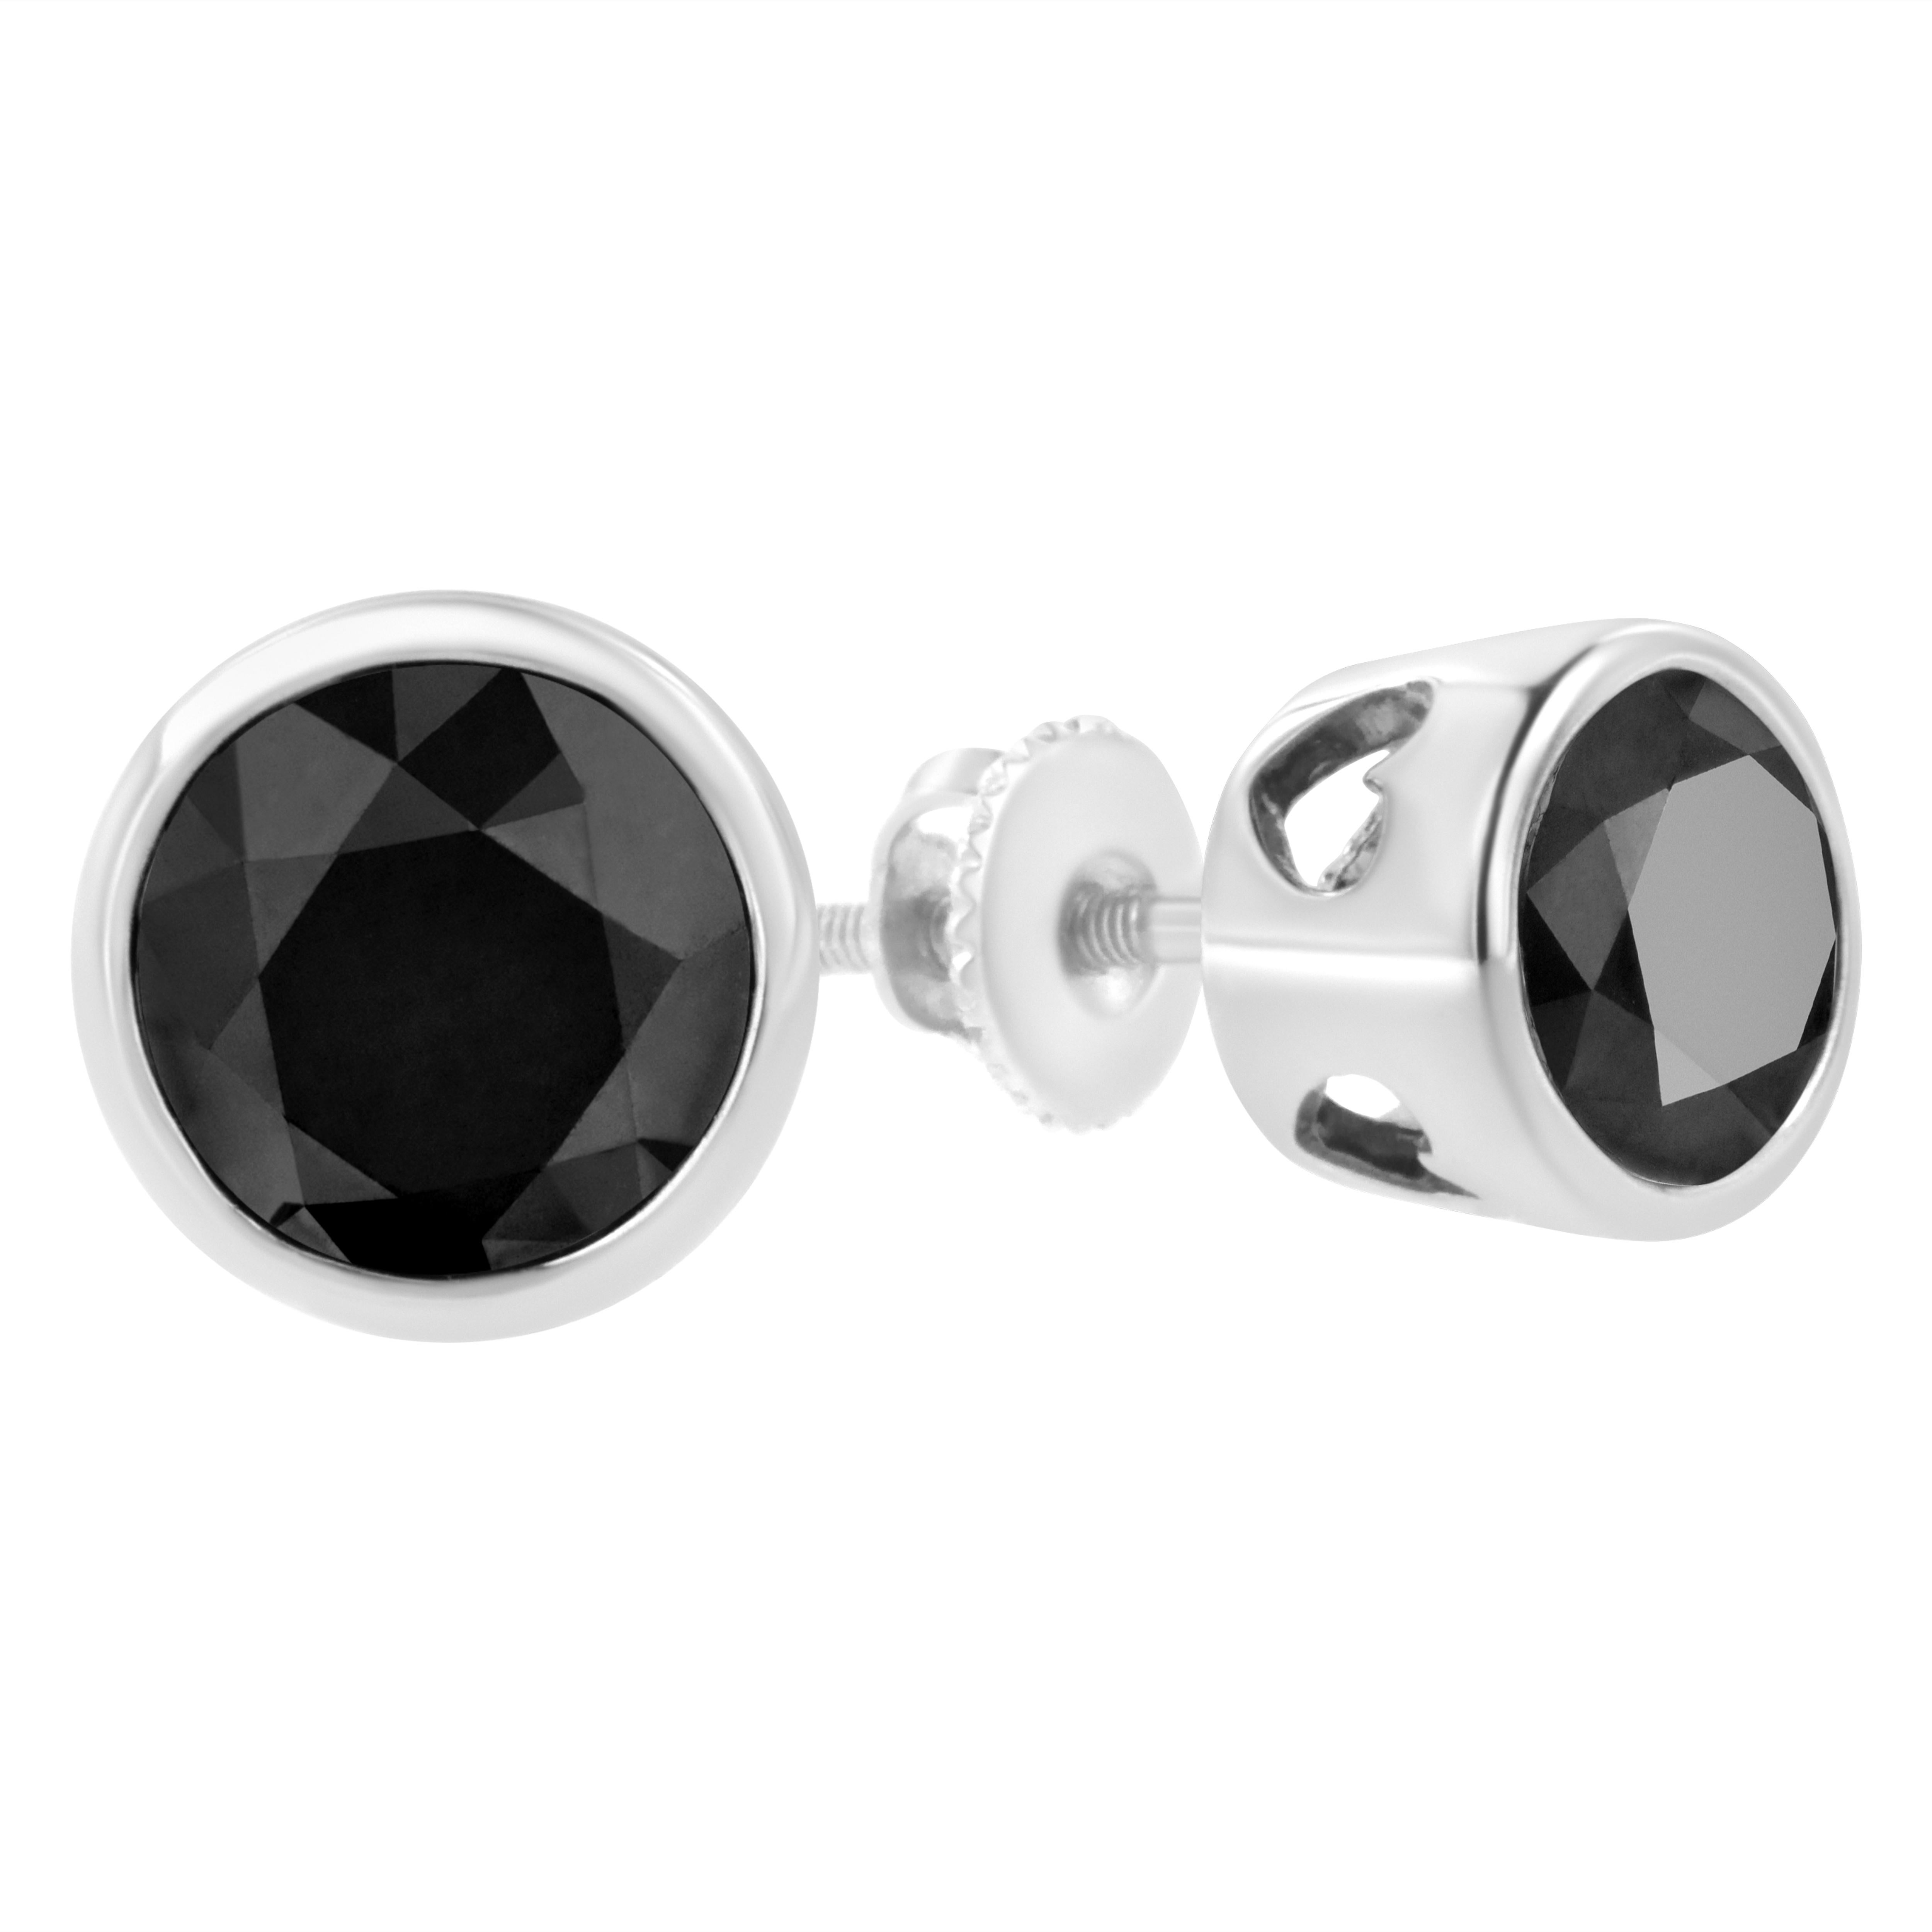 Add this stunningly unique diamond stud earrings to your jewelry collection and impress all your girlfriends. This beautiful pair of treated black studs are made from the finest 14k white gold, and is embellished with treated, black round-cut